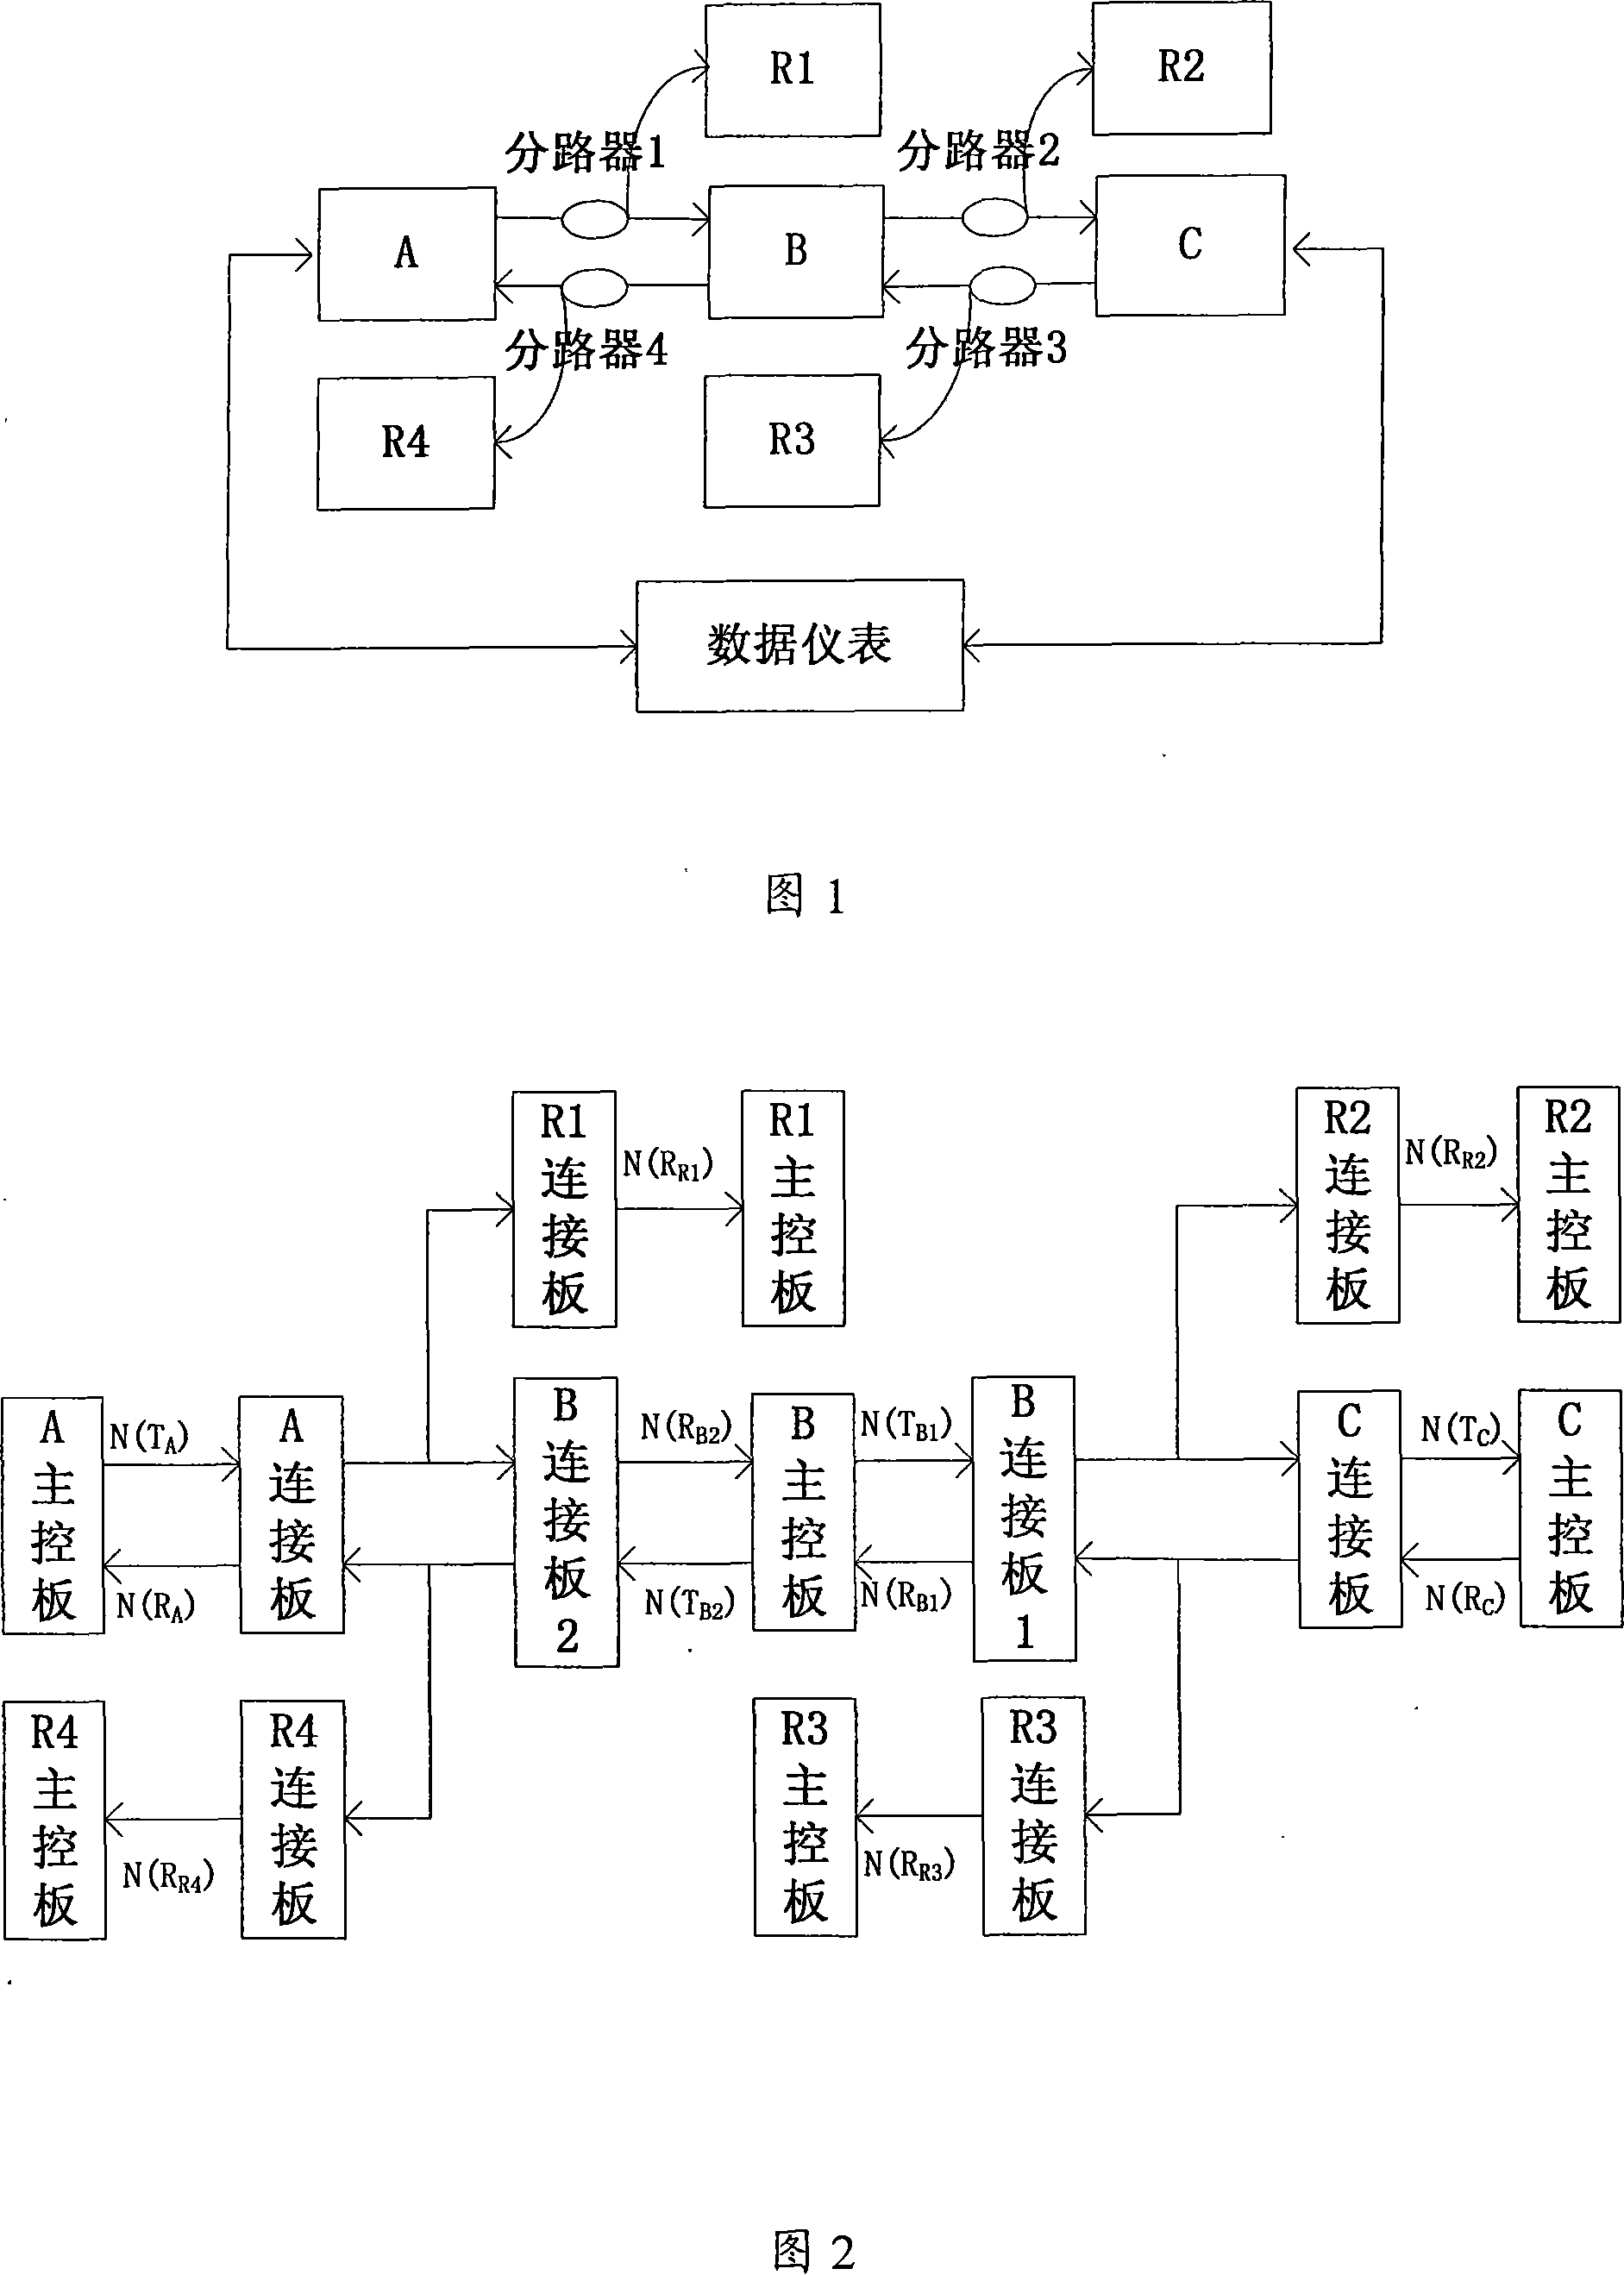 Method for locating embedded control path fault